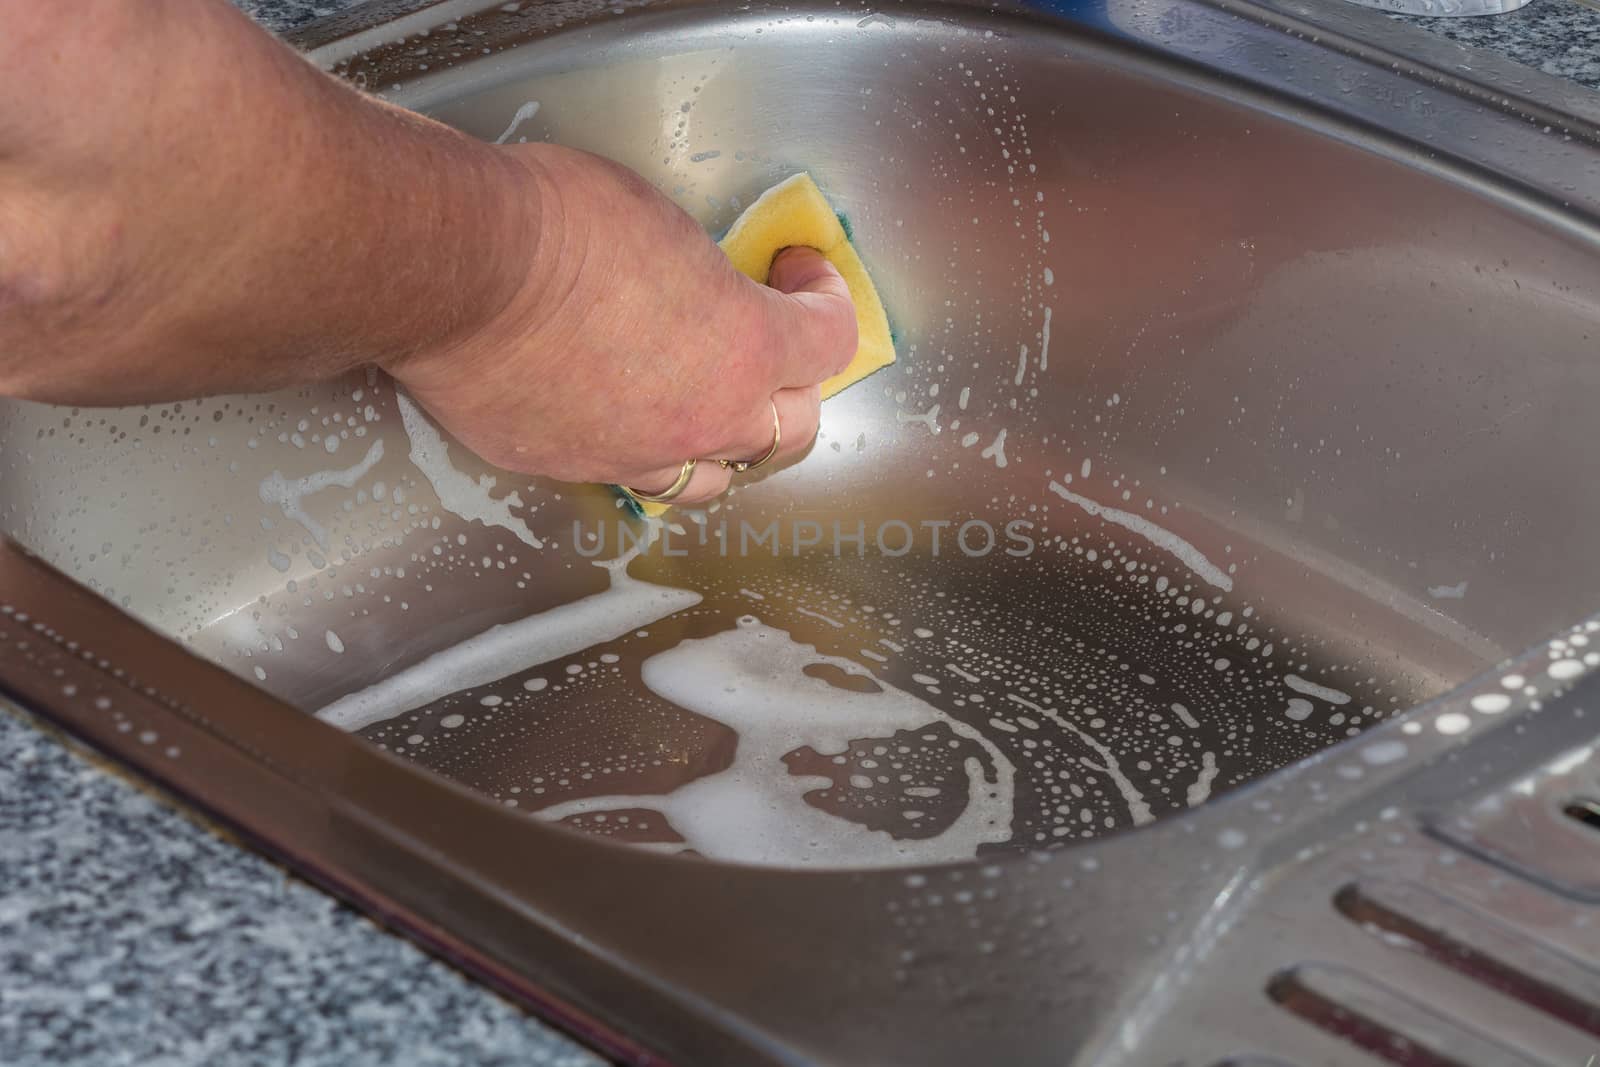 Cleaning a kitchen sink   by JFsPic